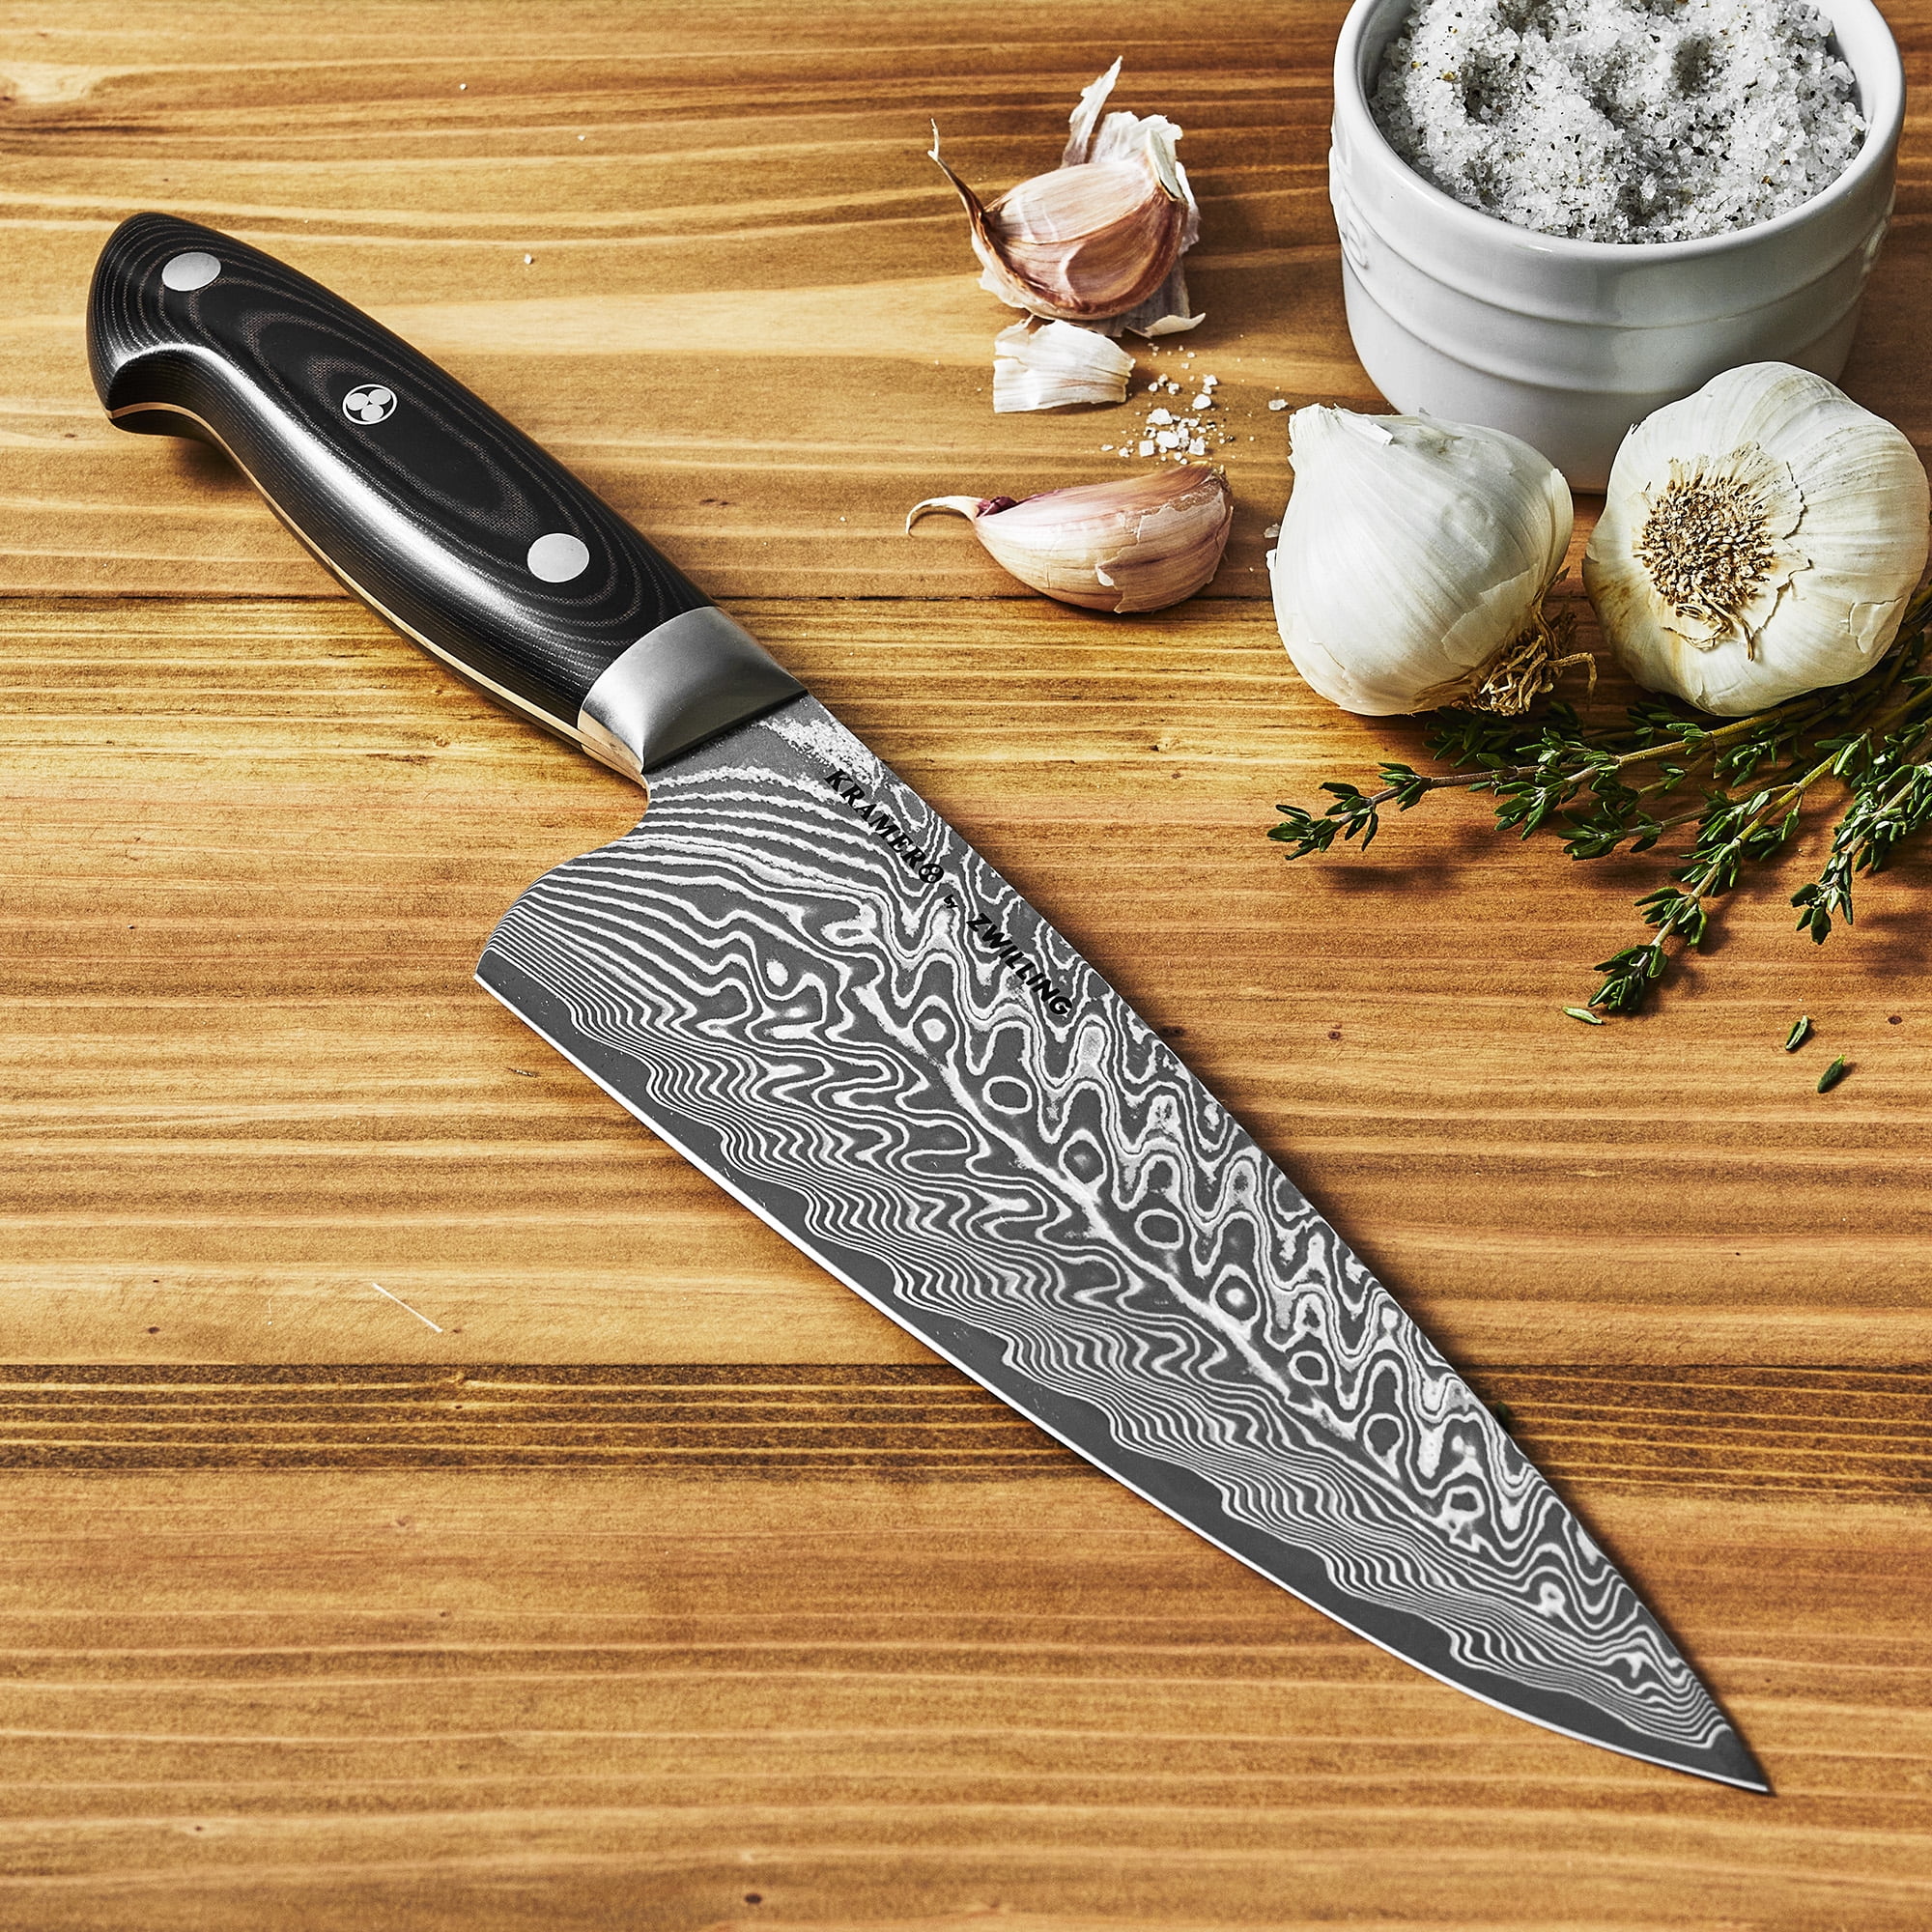 Stainless Damascus 8 Chef's Knife by Zwilling J.A. Henckels